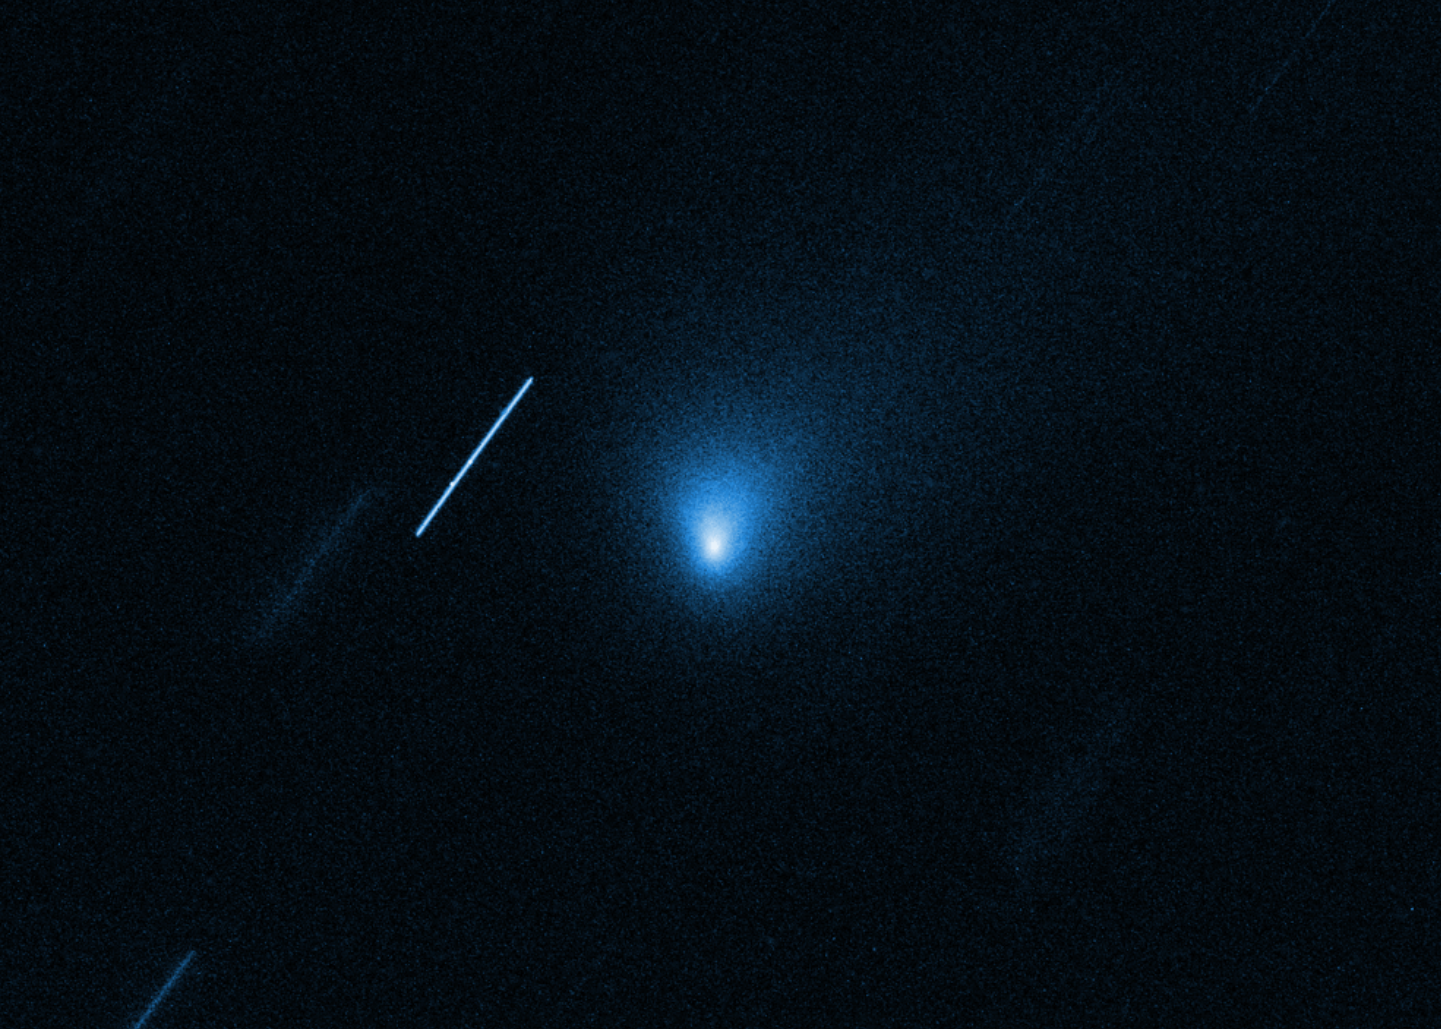 NASA Captured Stunning New Images of the Interstellar Comet in Our Solar System image